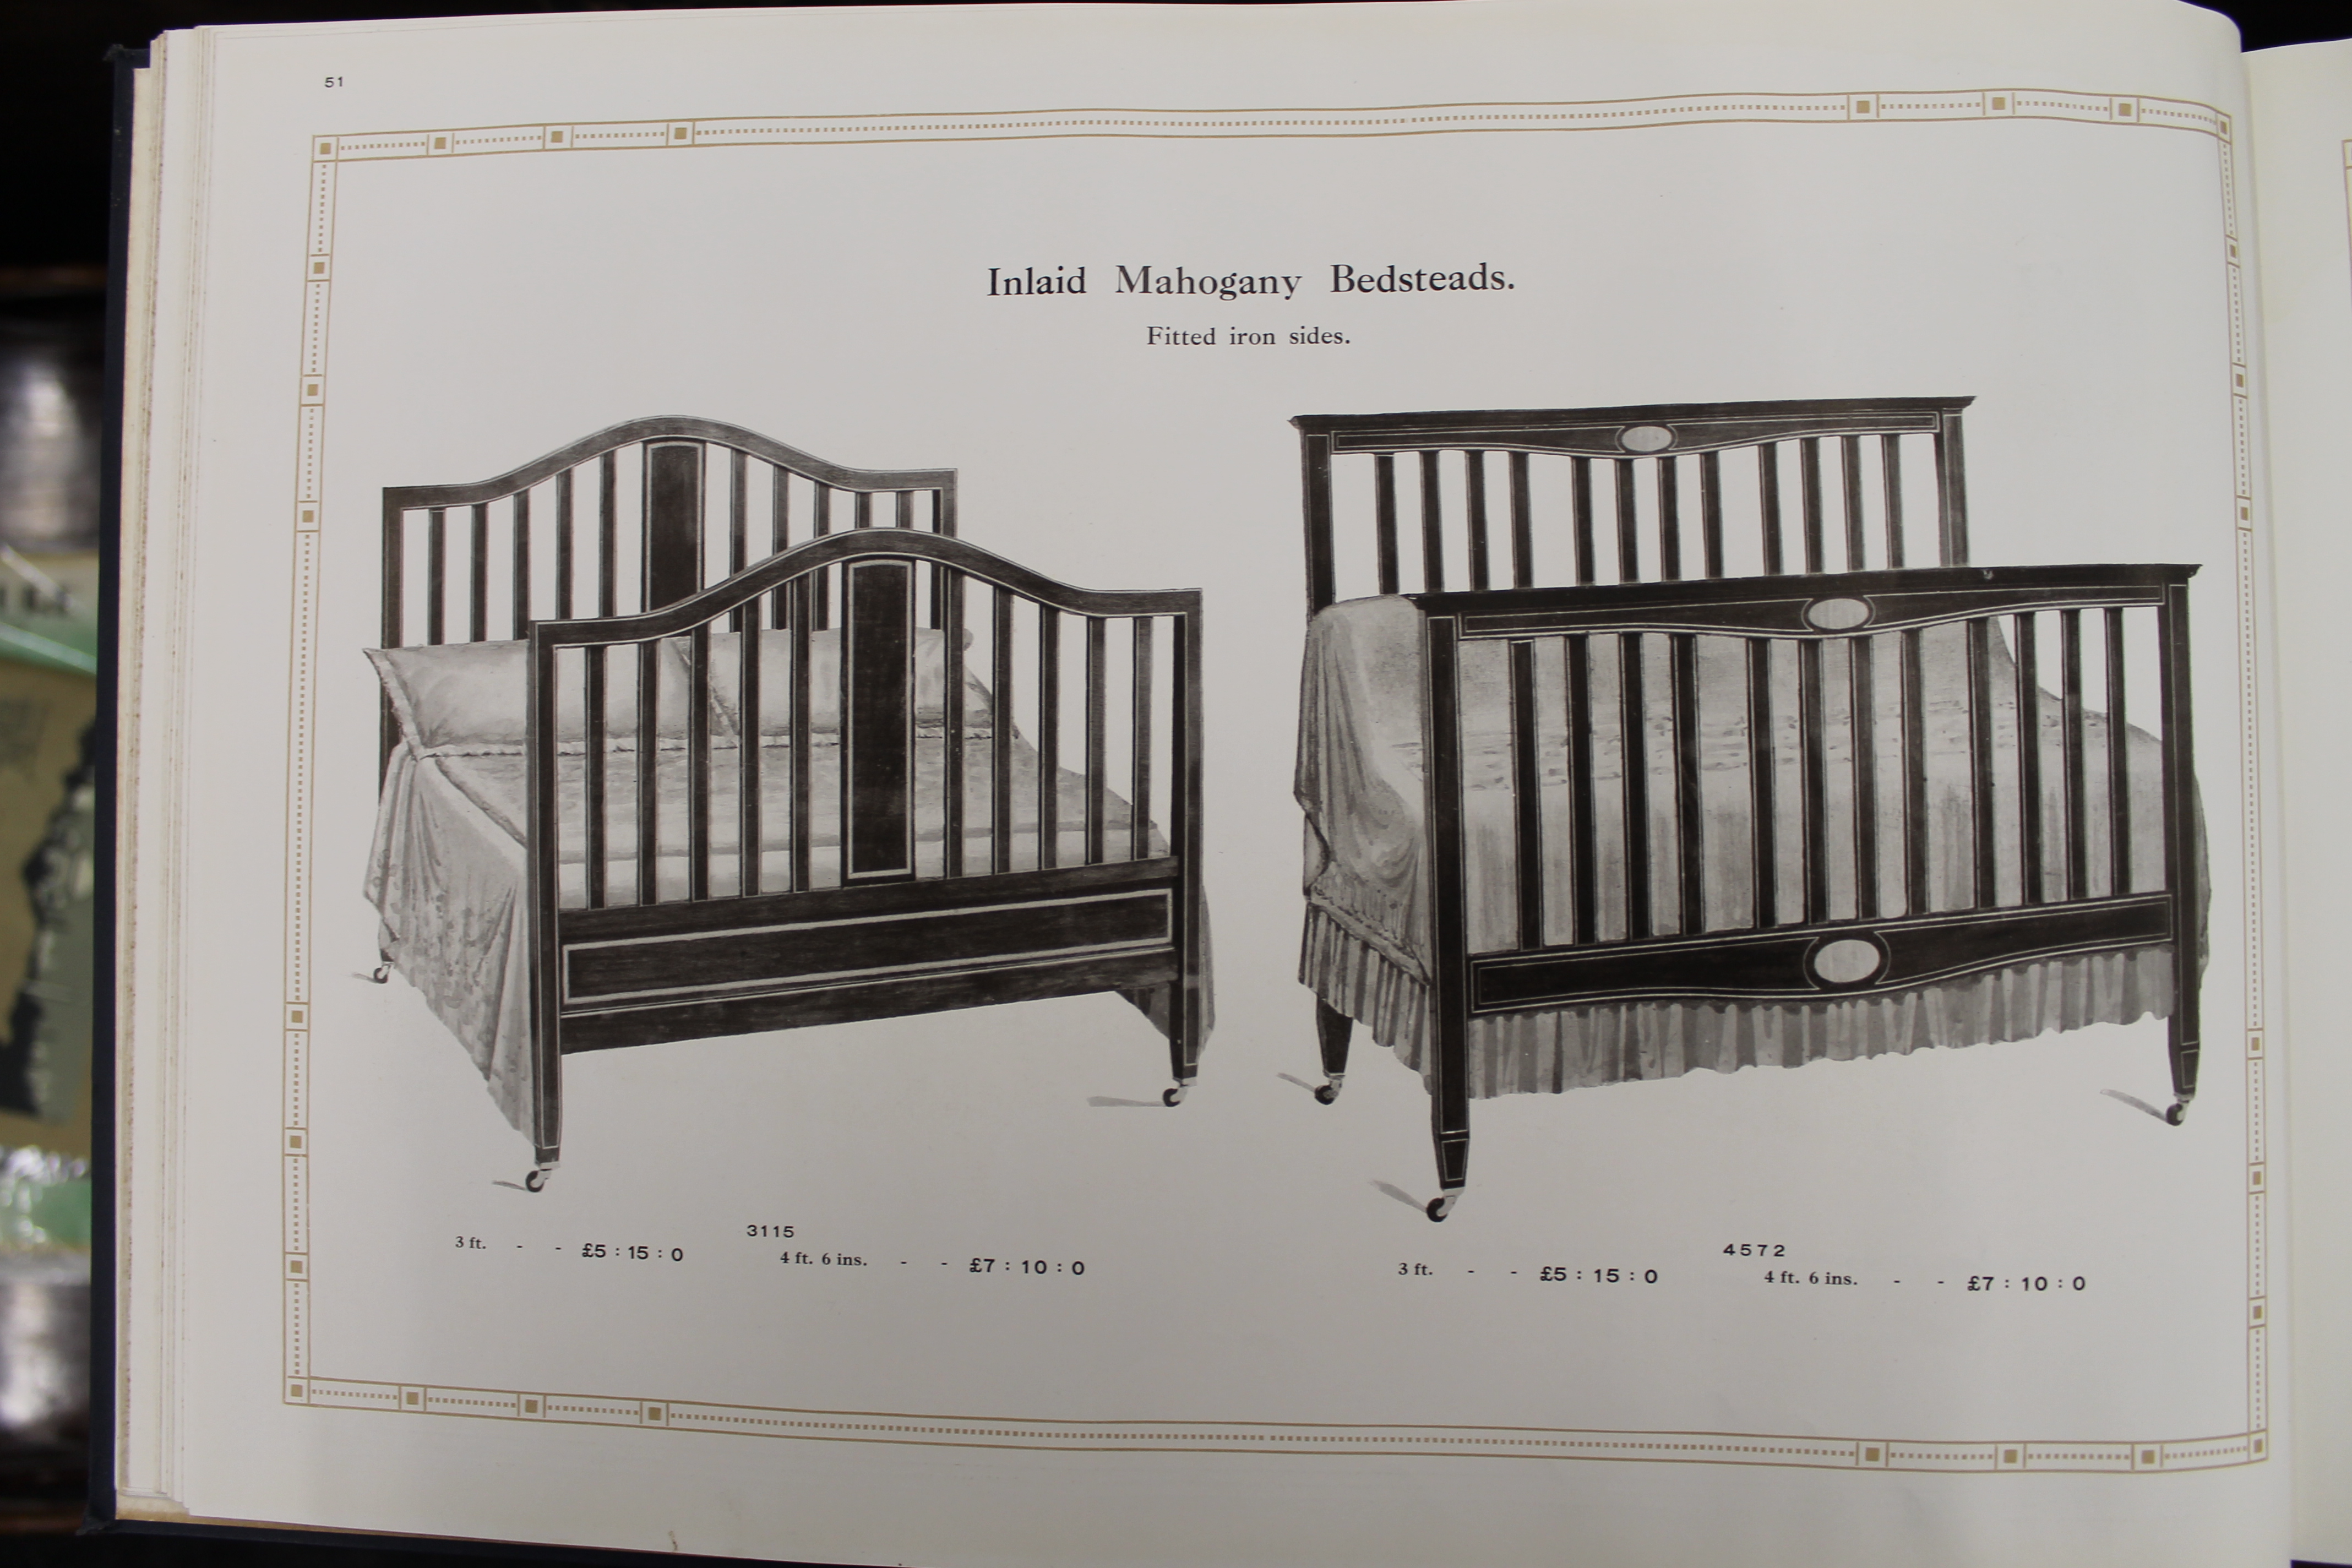 A Furniture Designs Ancient and Modern catalogue. - Image 7 of 10